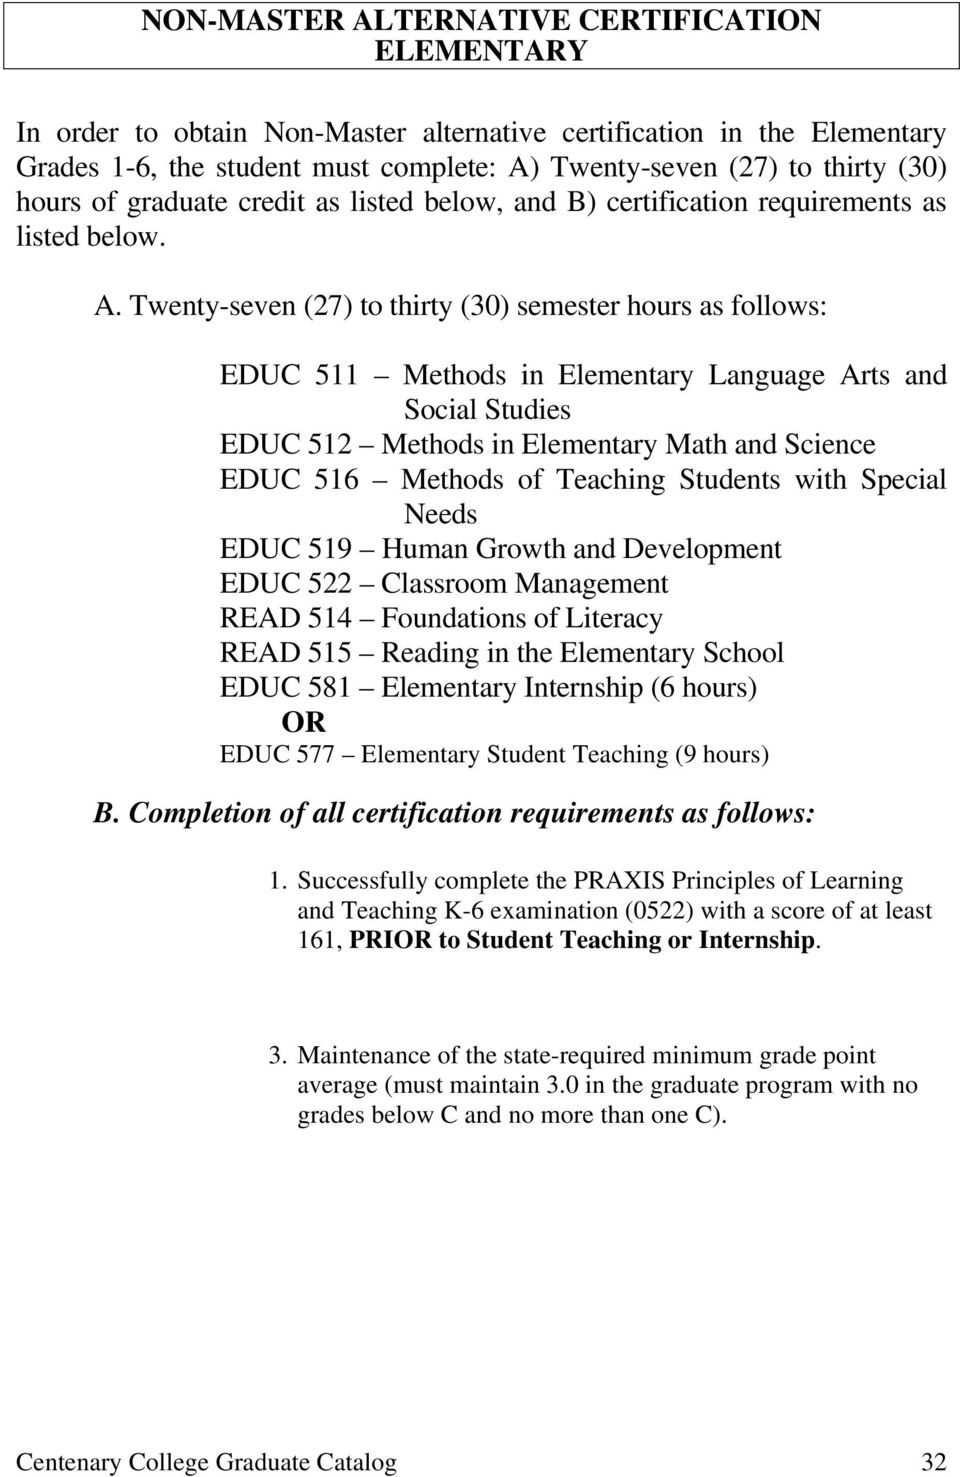 Twenty-seven (27) to thirty (30) semester hours as follows: EDUC 511 Methods in Elementary Language Arts and Social Studies EDUC 512 Methods in Elementary Math and Science EDUC 516 Methods of